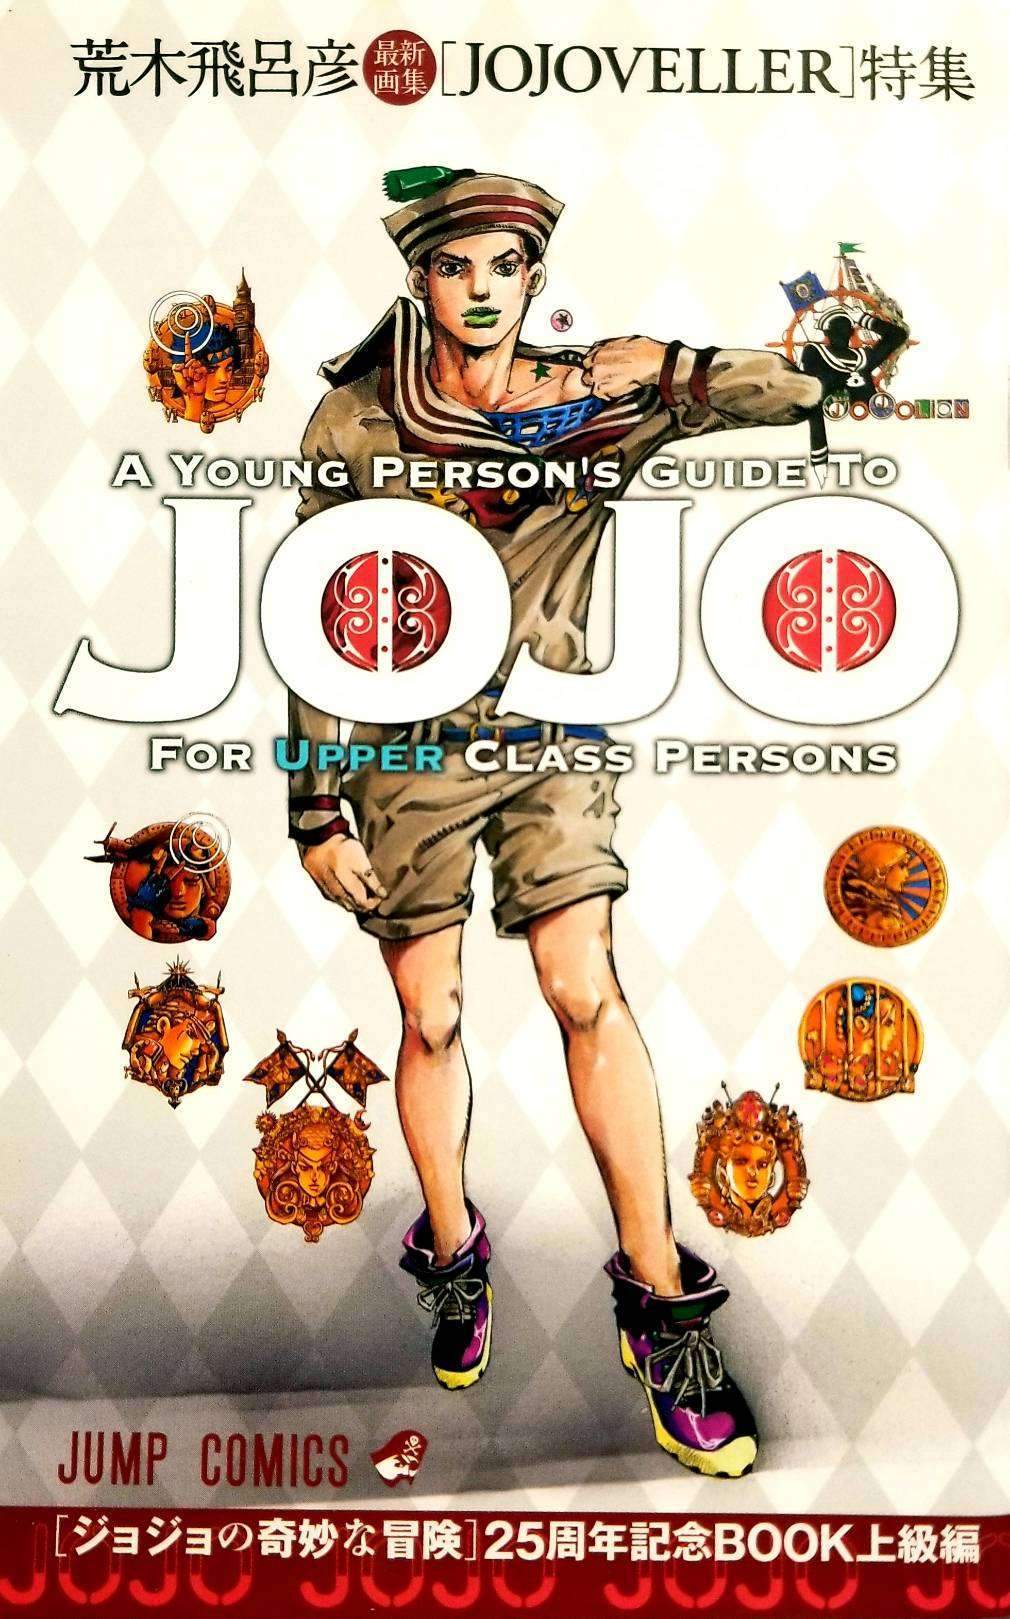 JoJo's Bizarre Adventure 25th Anniversary Booklet: A Young Person's Guide to Jojo for Upper Class Persons front cover